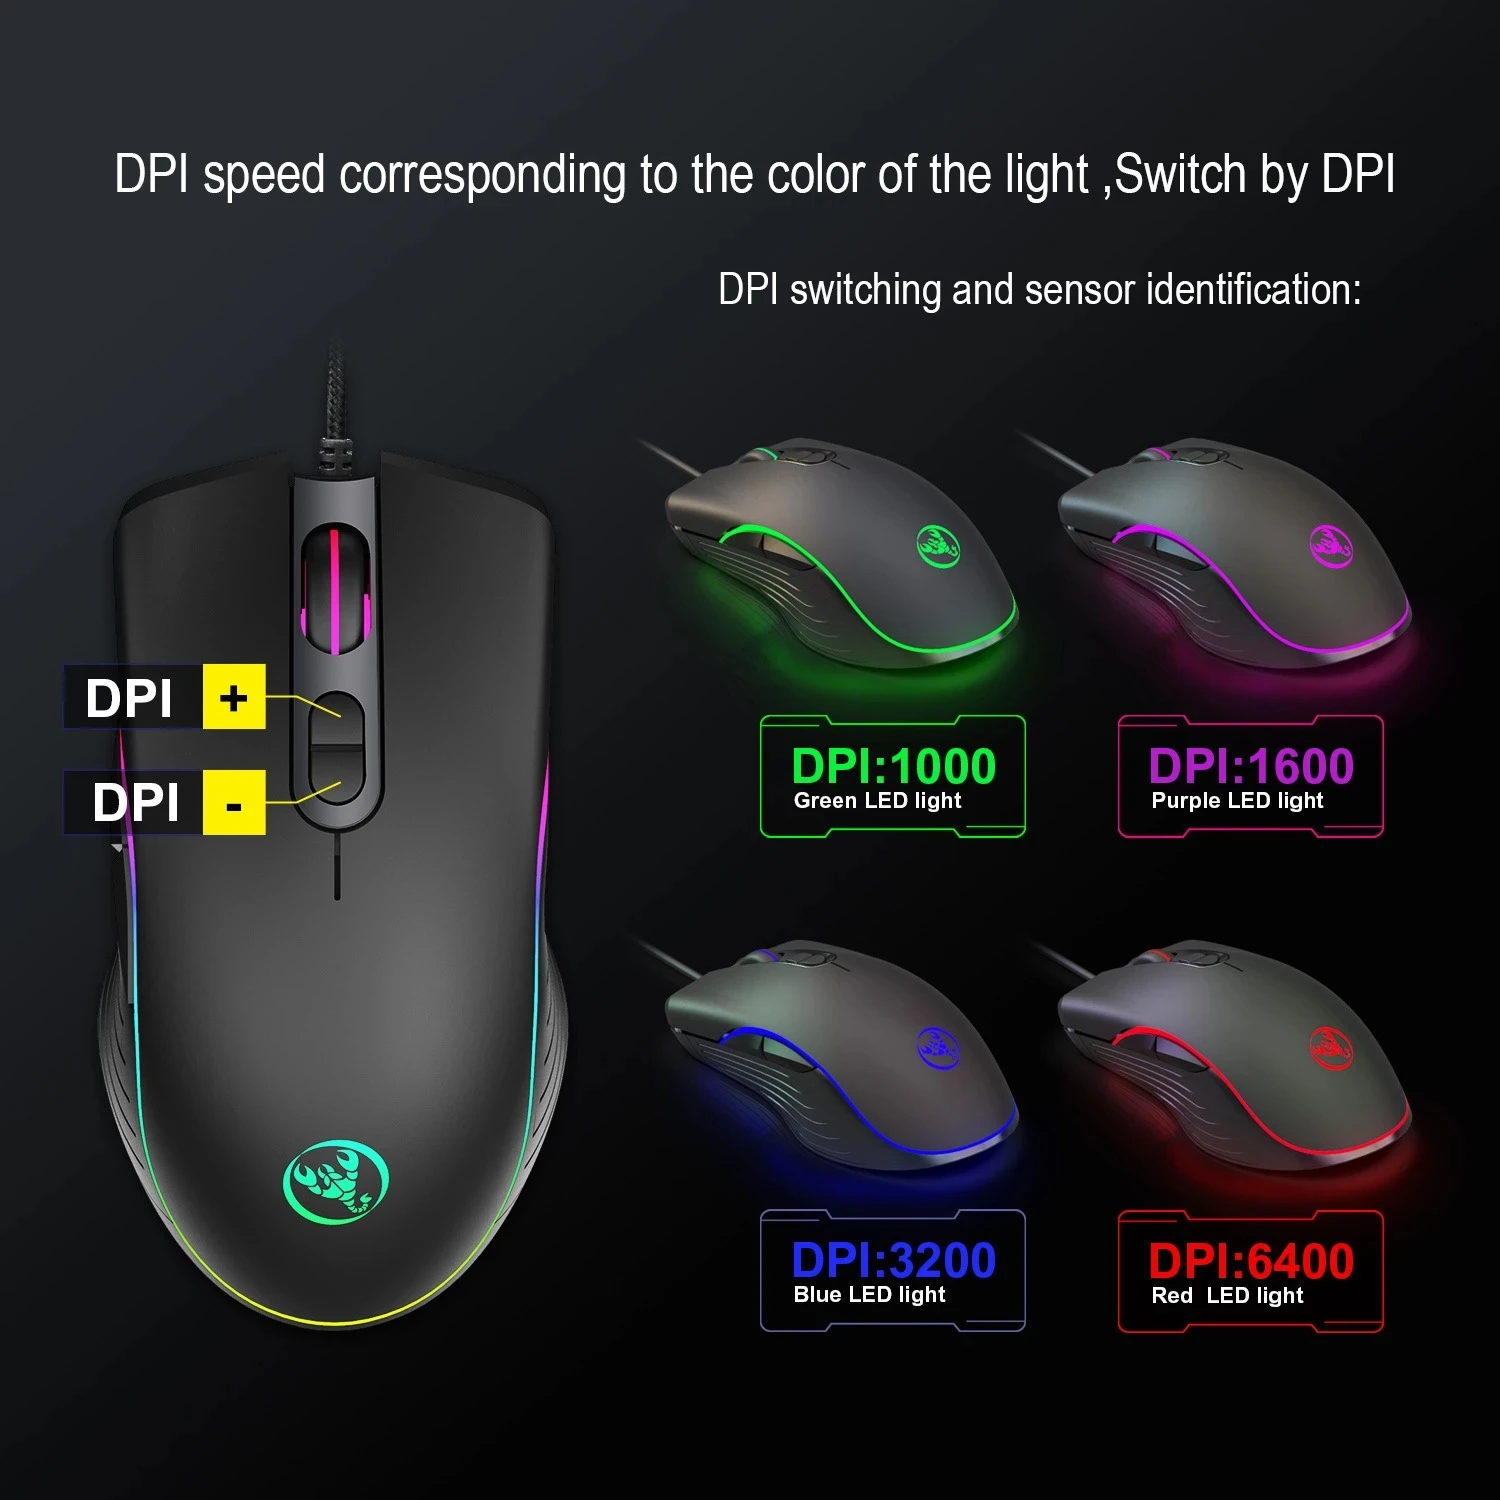 

Gaming Mouse 7 Buttons 6400Dpi Optical USB Wired Desktop Mice RGB Backlit Mice for PC Computer Laptop Gamers Y5LC